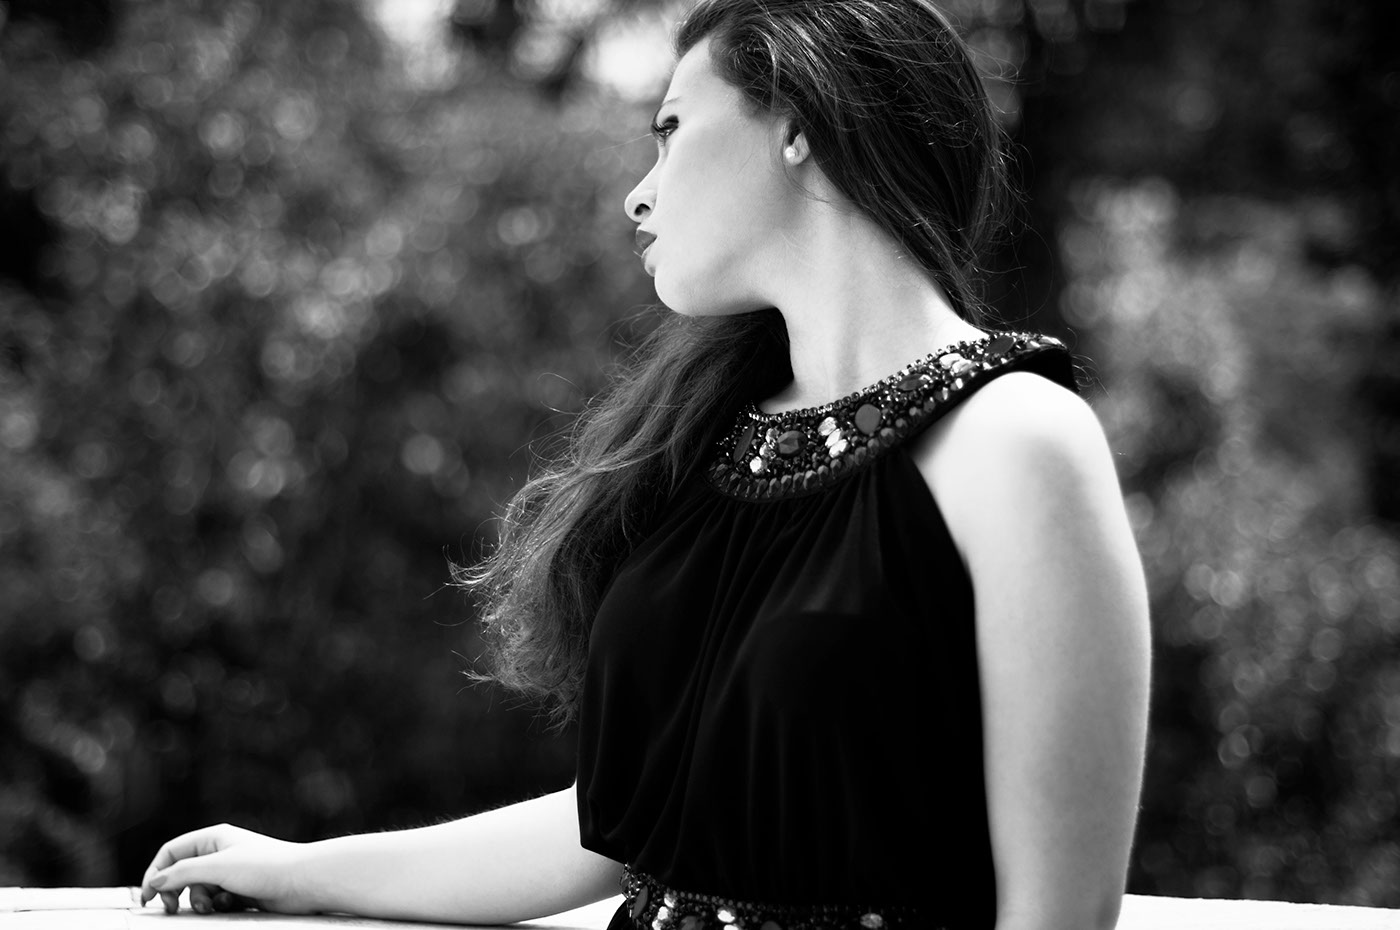 thoughts sofia hassan Love model garden fountain statue black and white dress Classic elegance Portraiture portrait woman girl